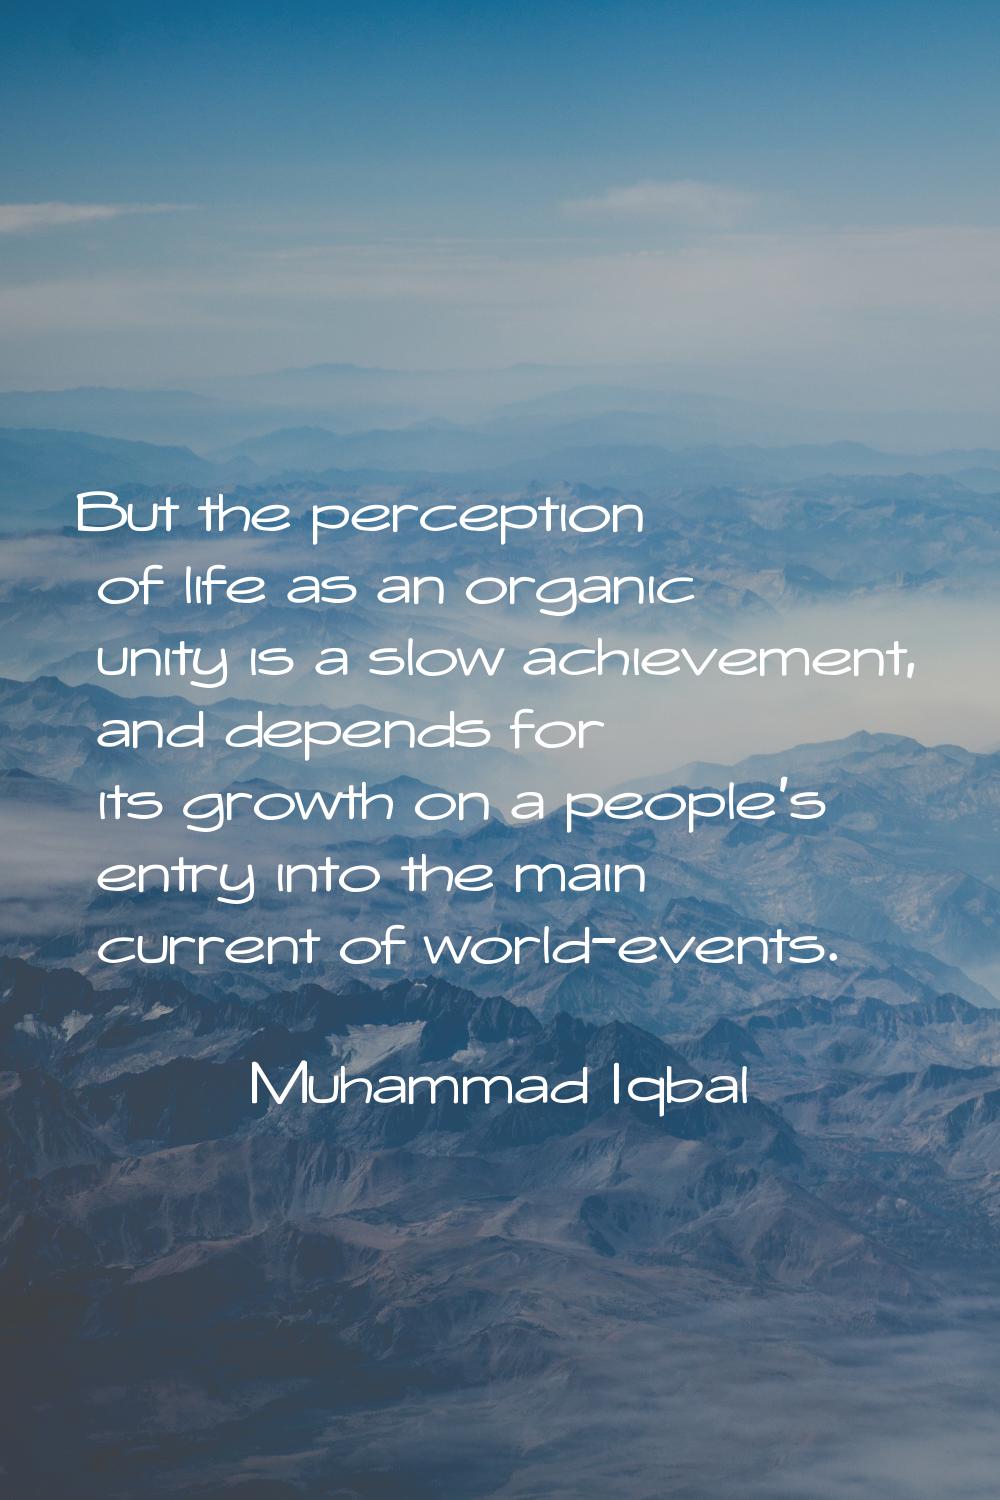 But the perception of life as an organic unity is a slow achievement, and depends for its growth on